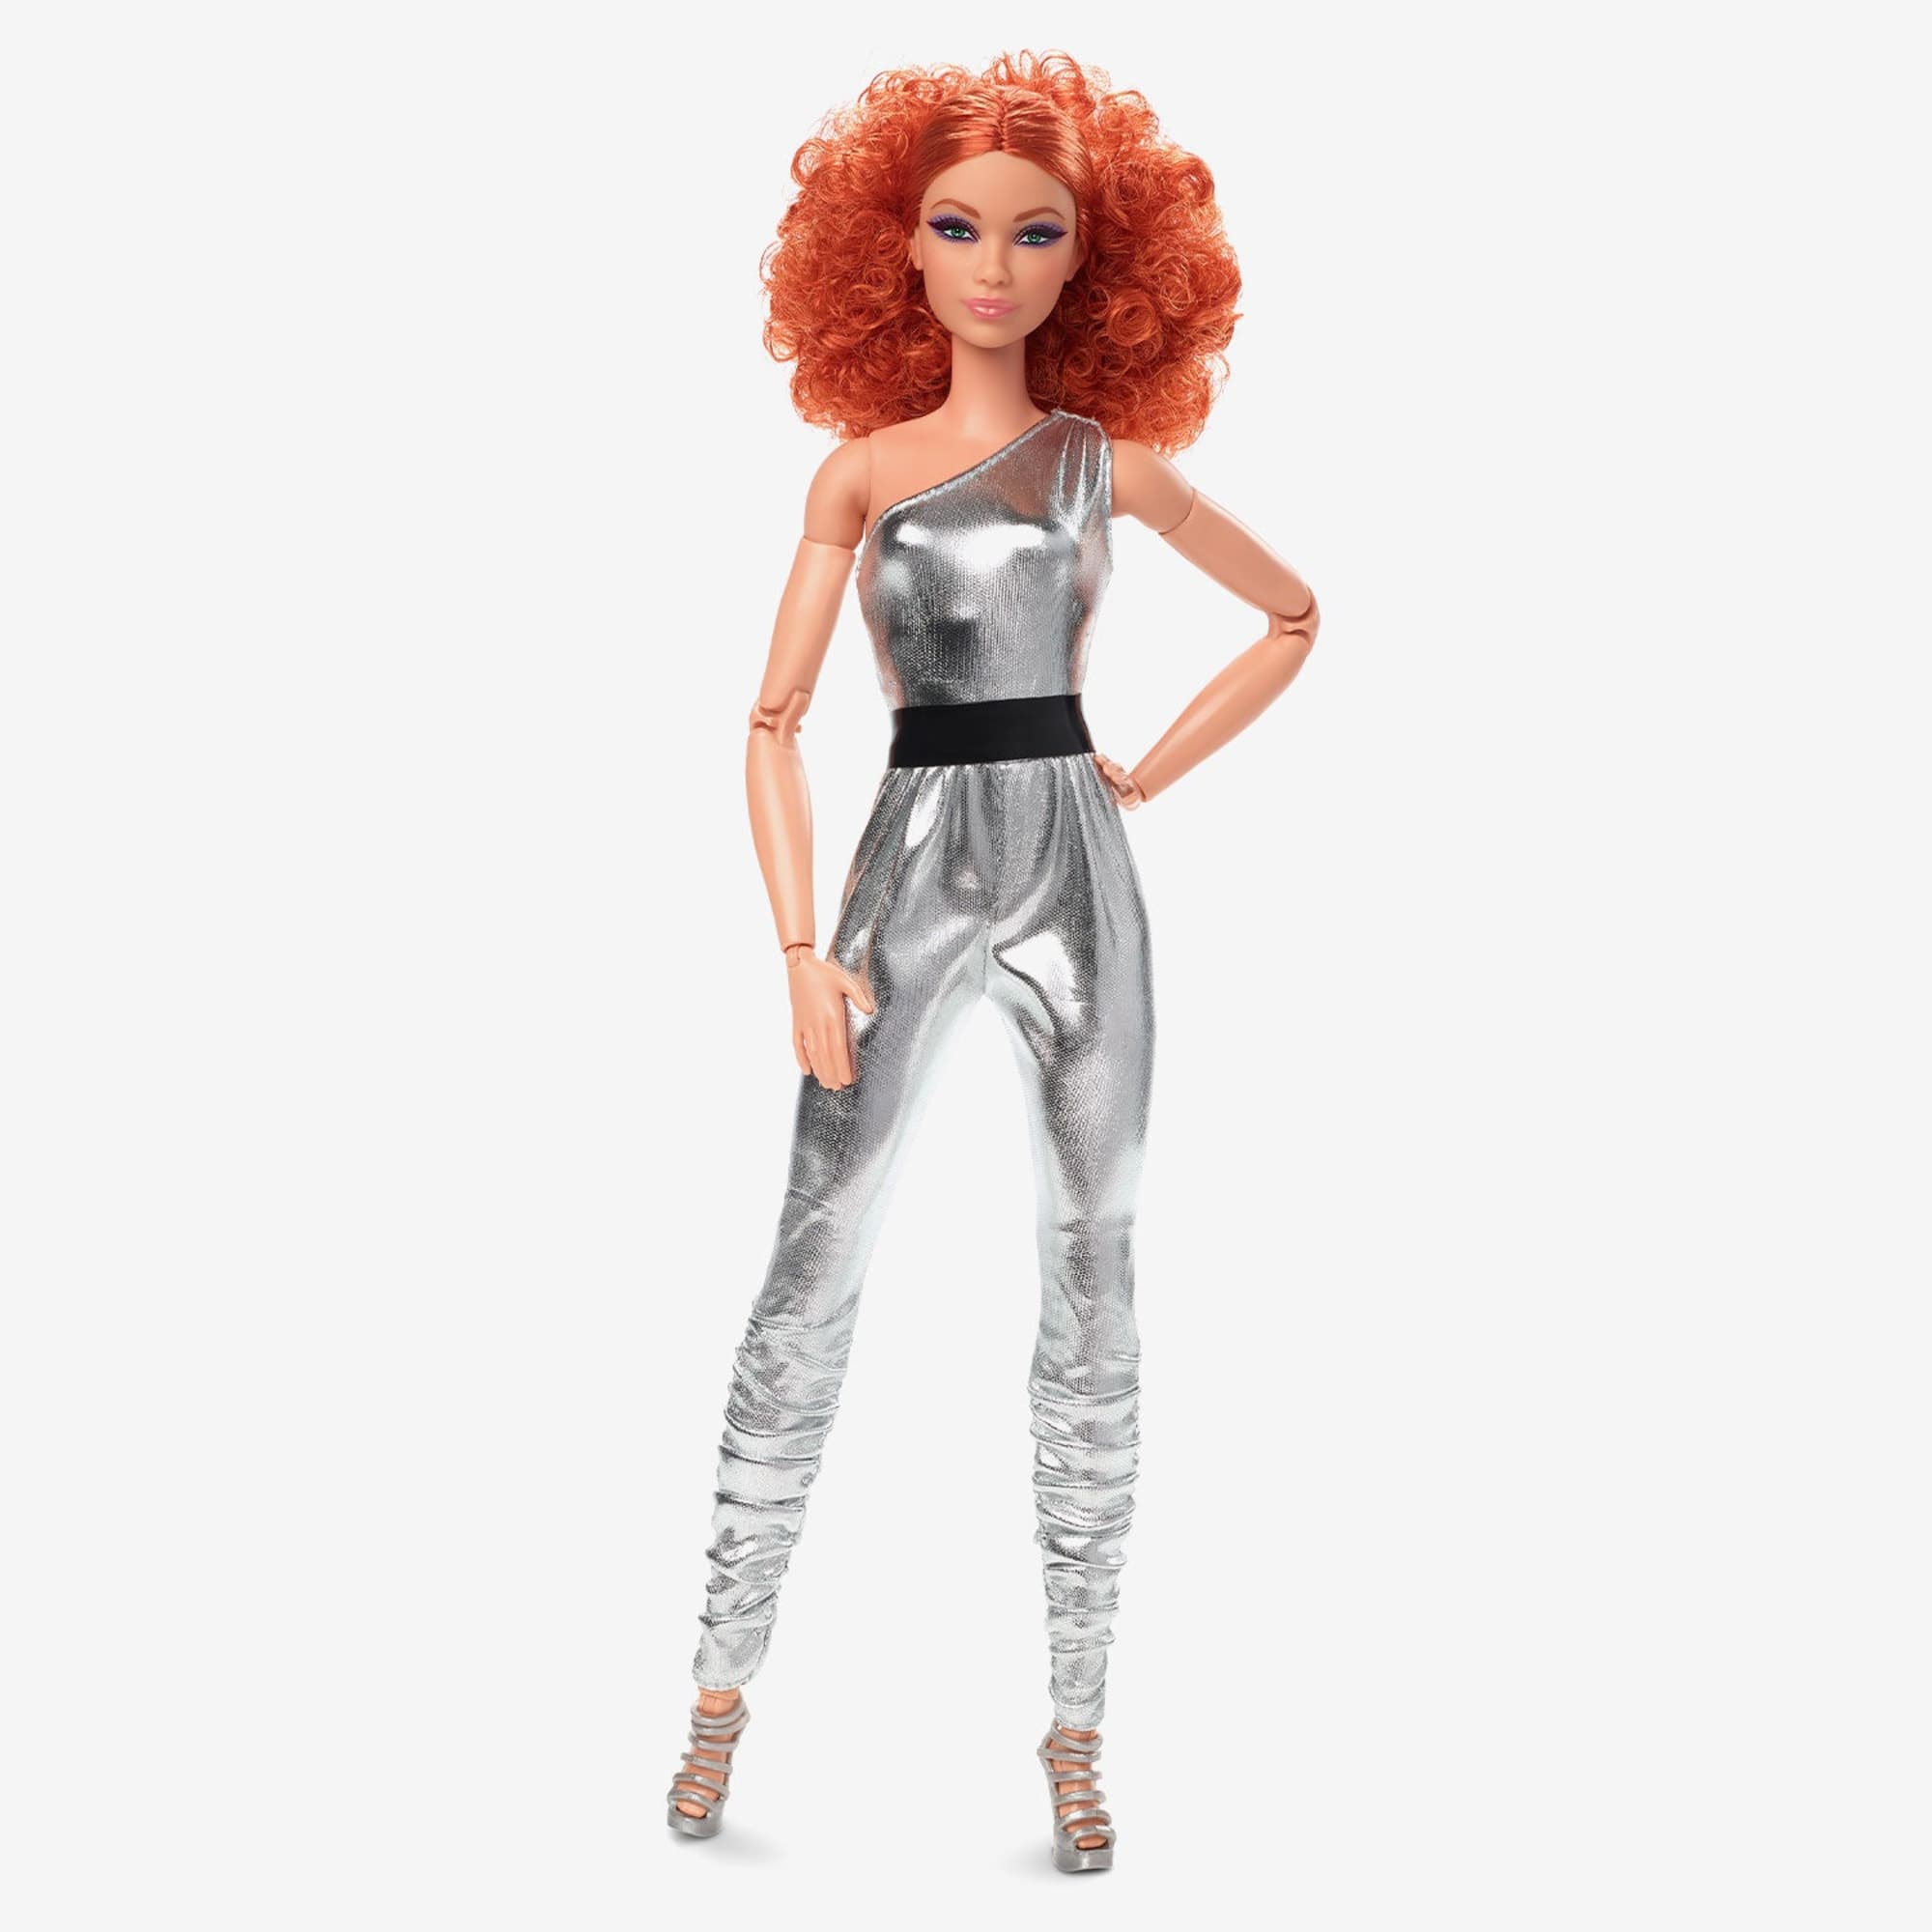 Barbie Signature Collector Dolls & Merch | Mattel Creations – Page 3